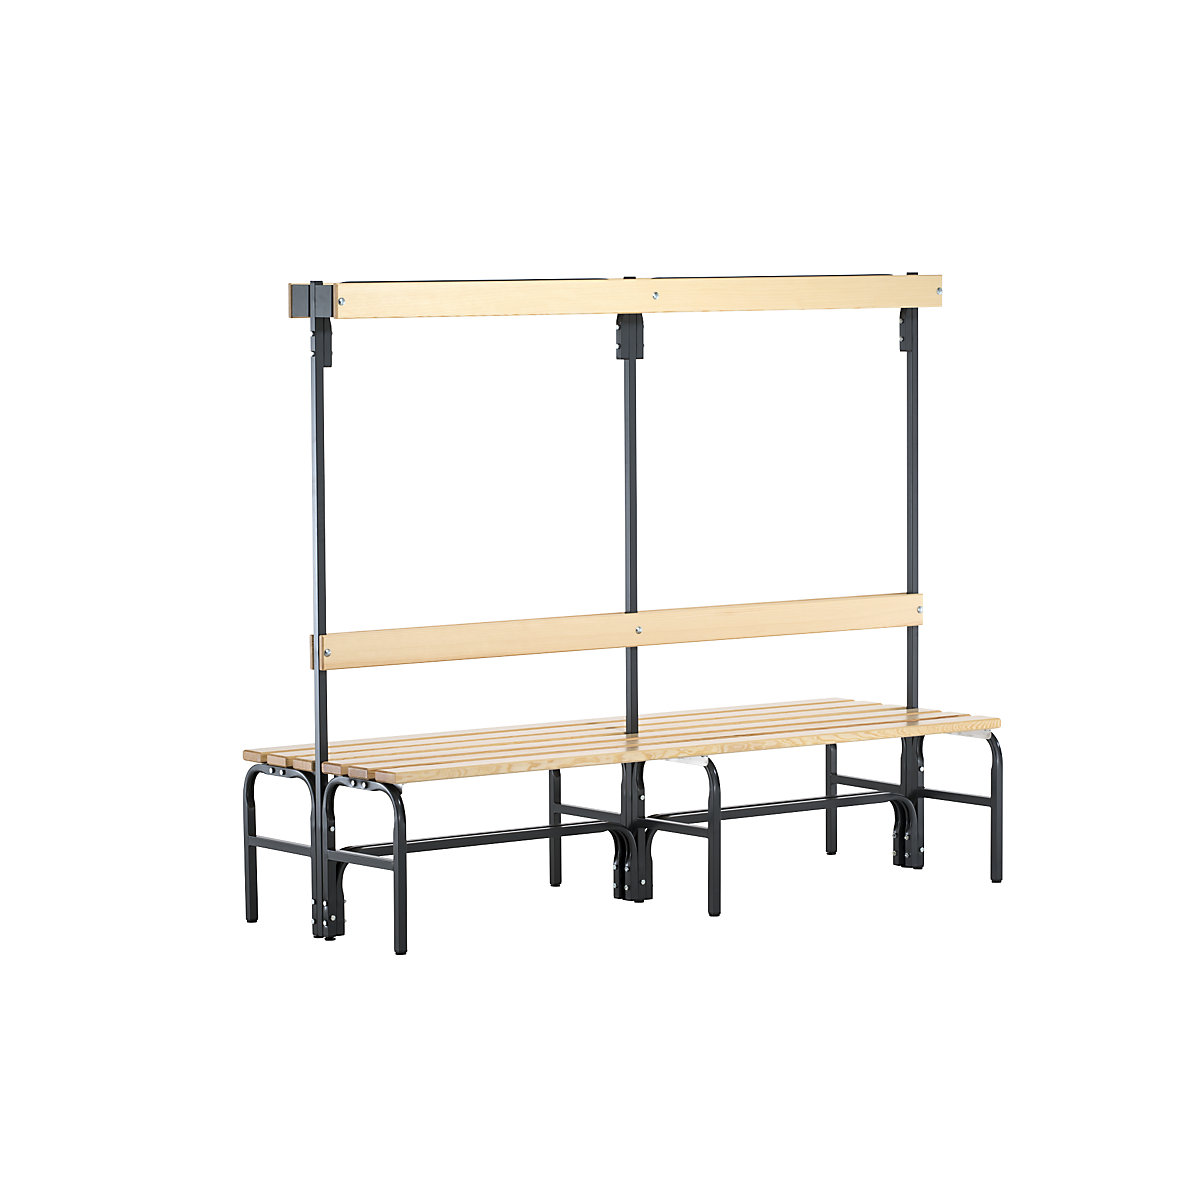 Cloakroom bench with hook strips - Sypro